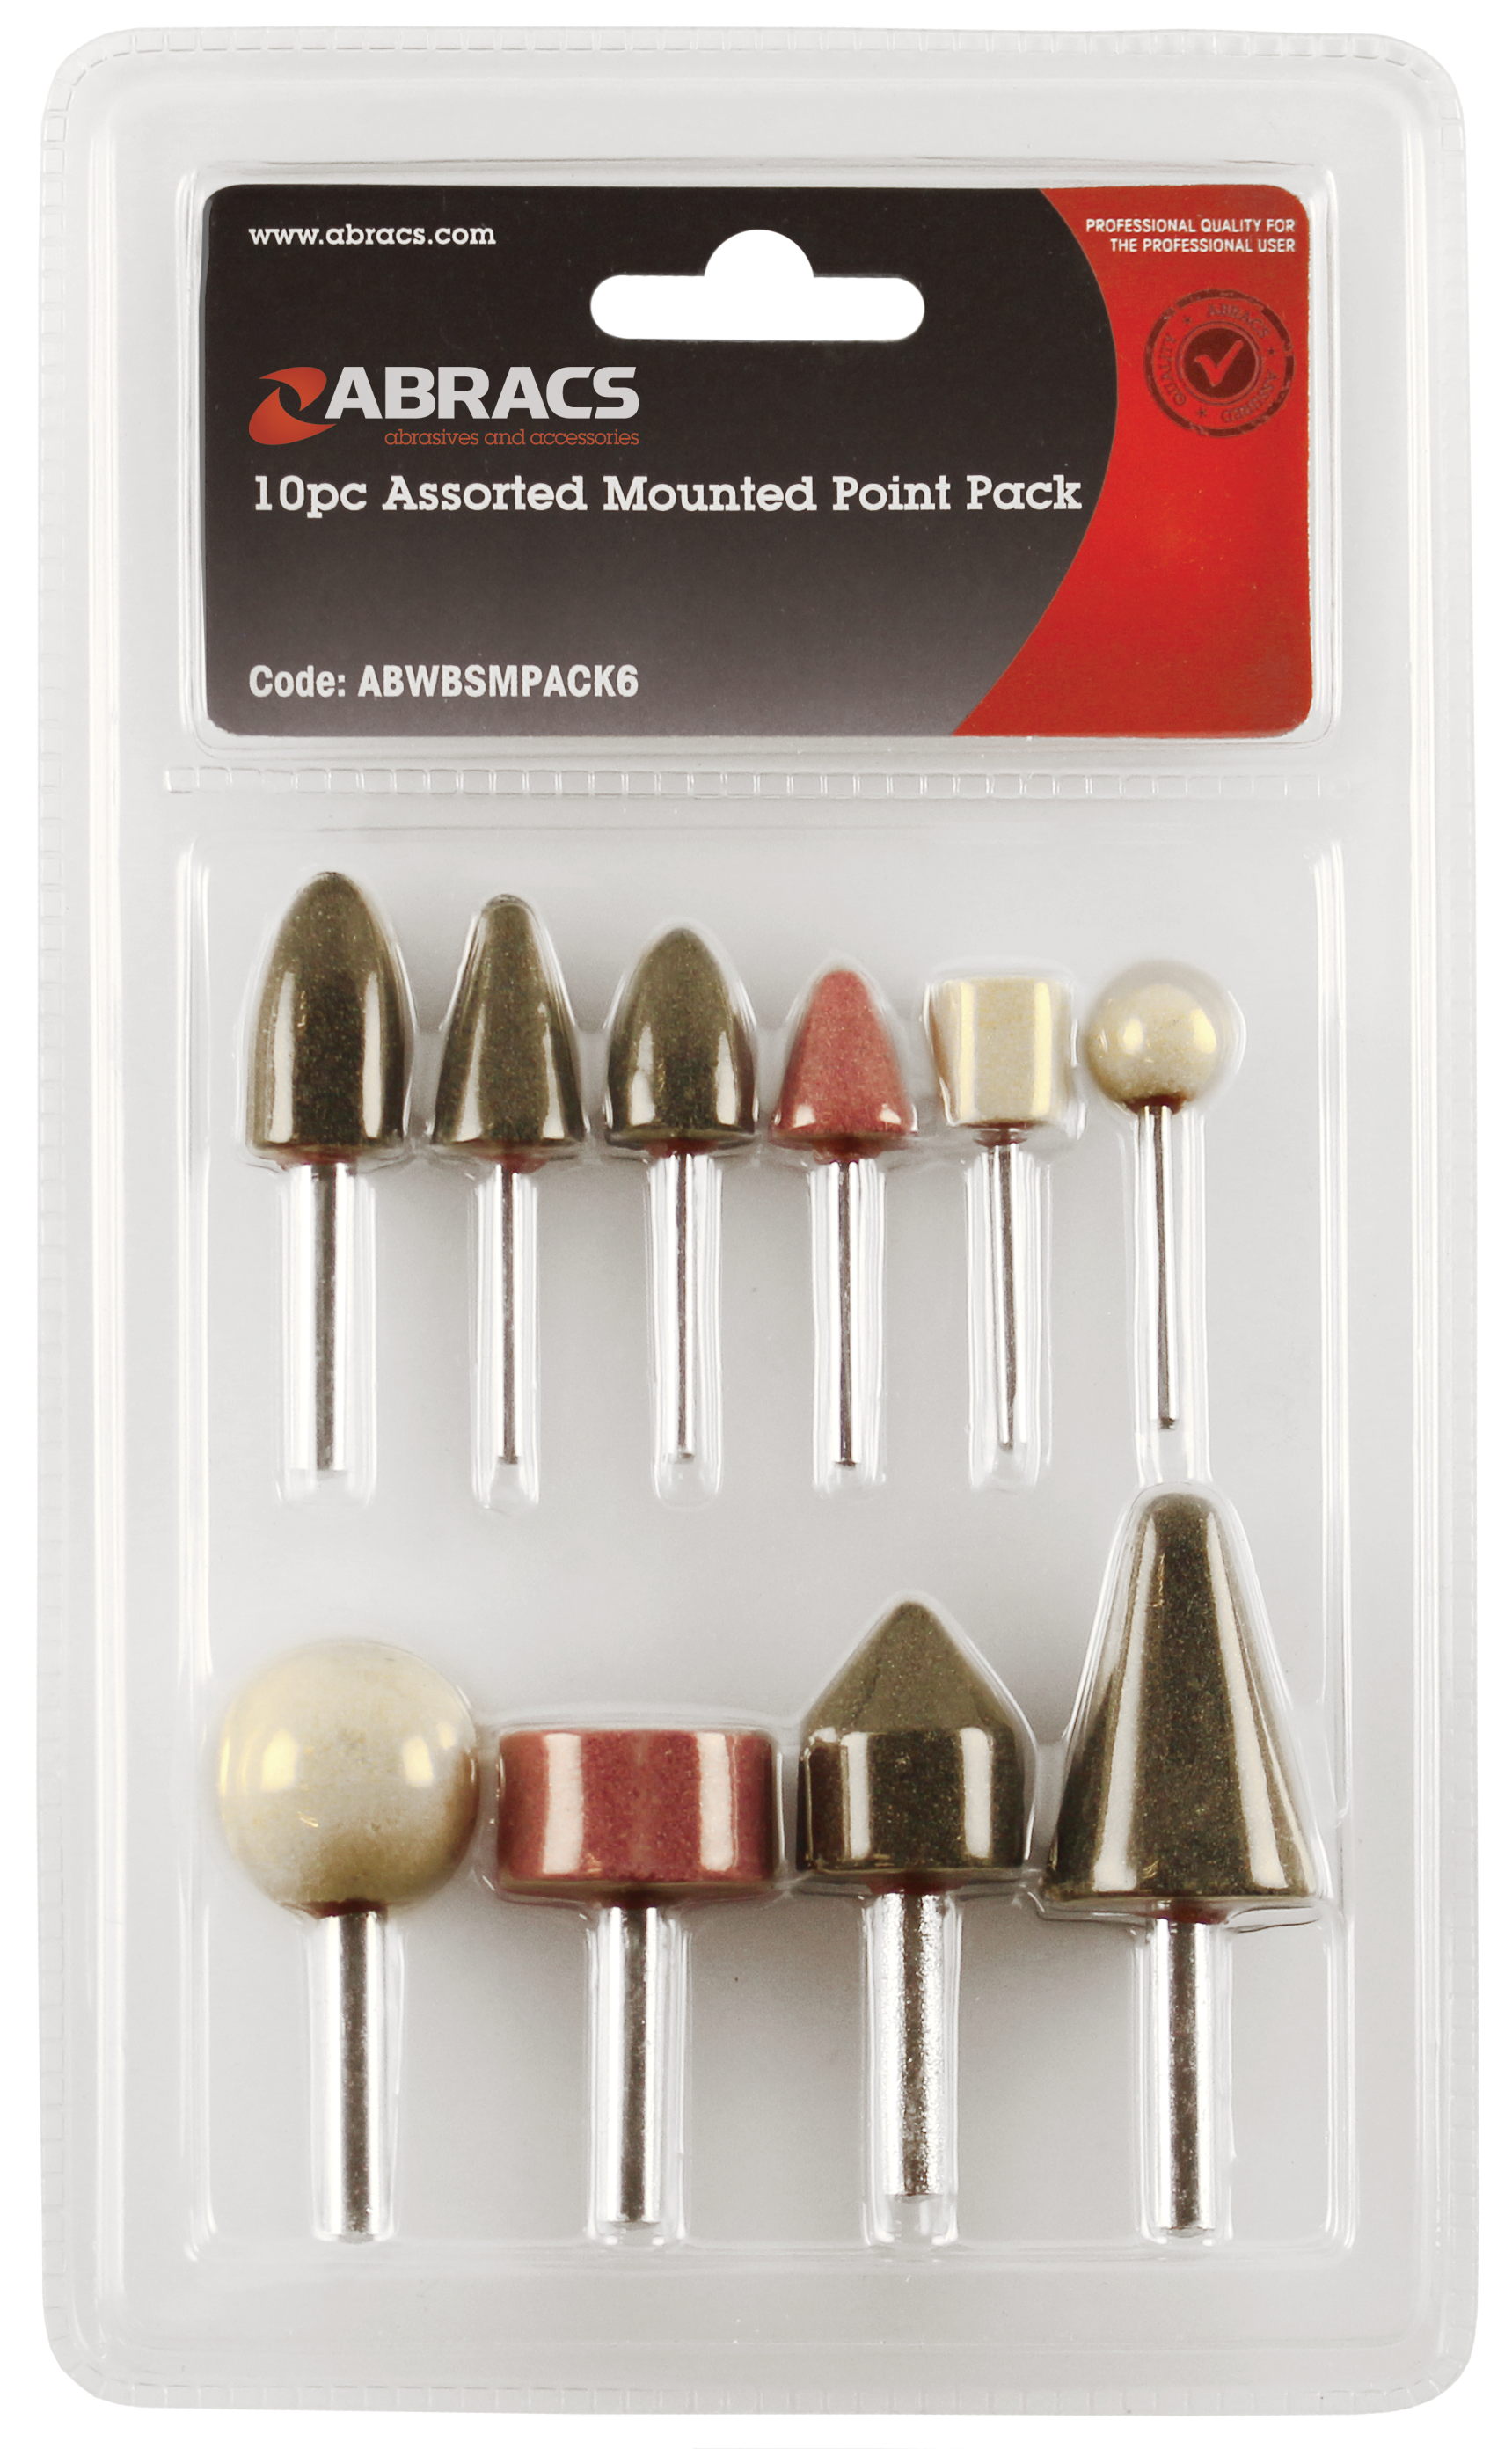 Abracs 10pc Assorted Mounted Point Pack ABWBSMPACK6